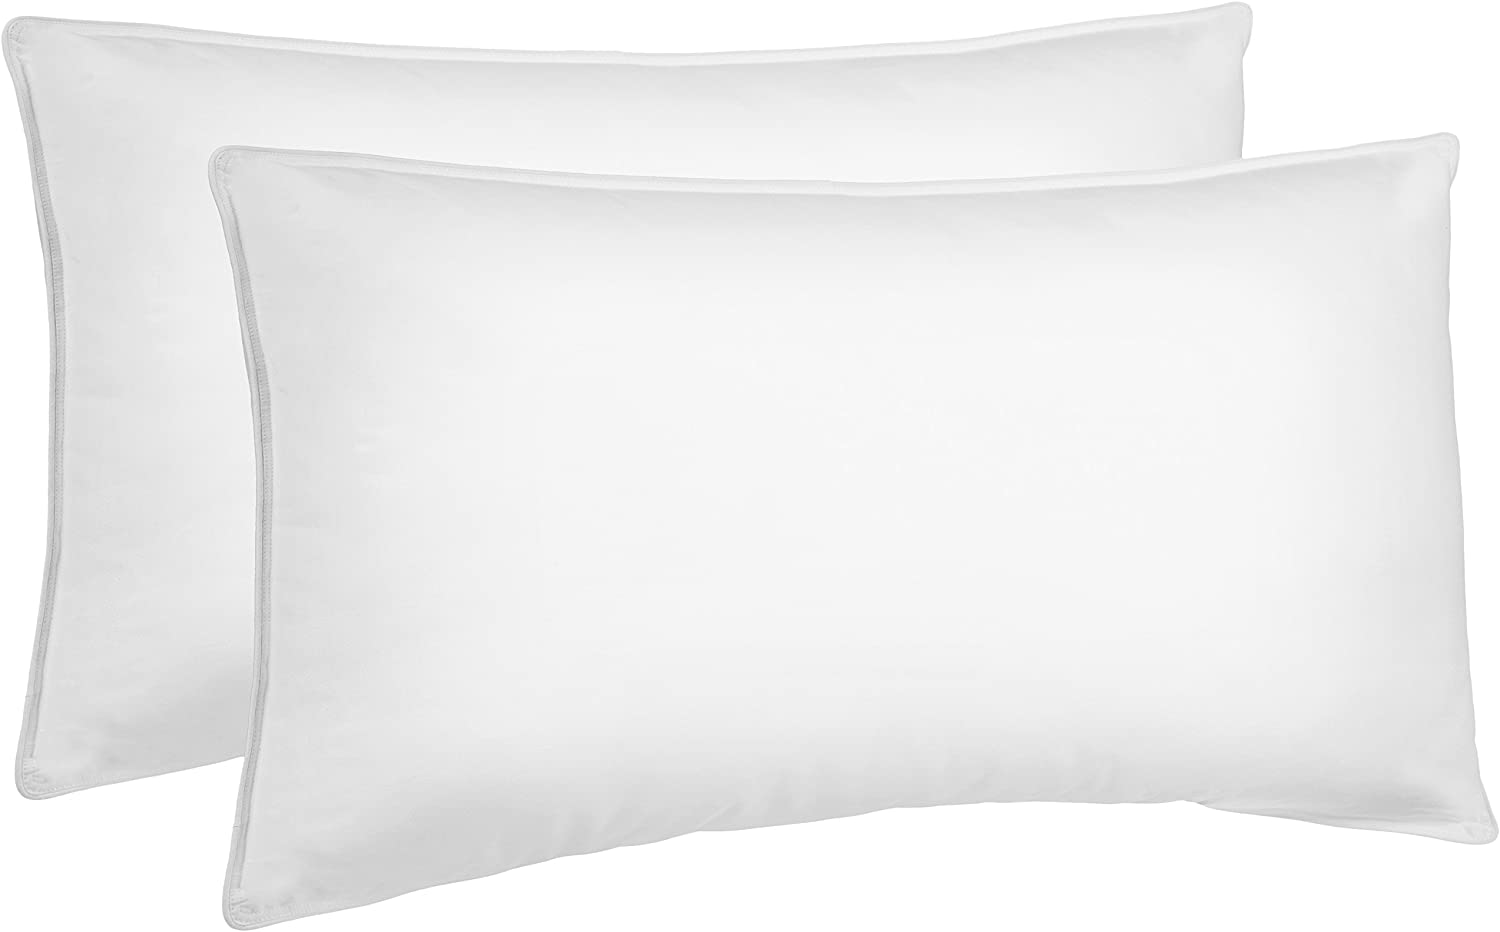 AmazonBasics 2-Pack Pillows For Stomach Sleepers, Down Alternative